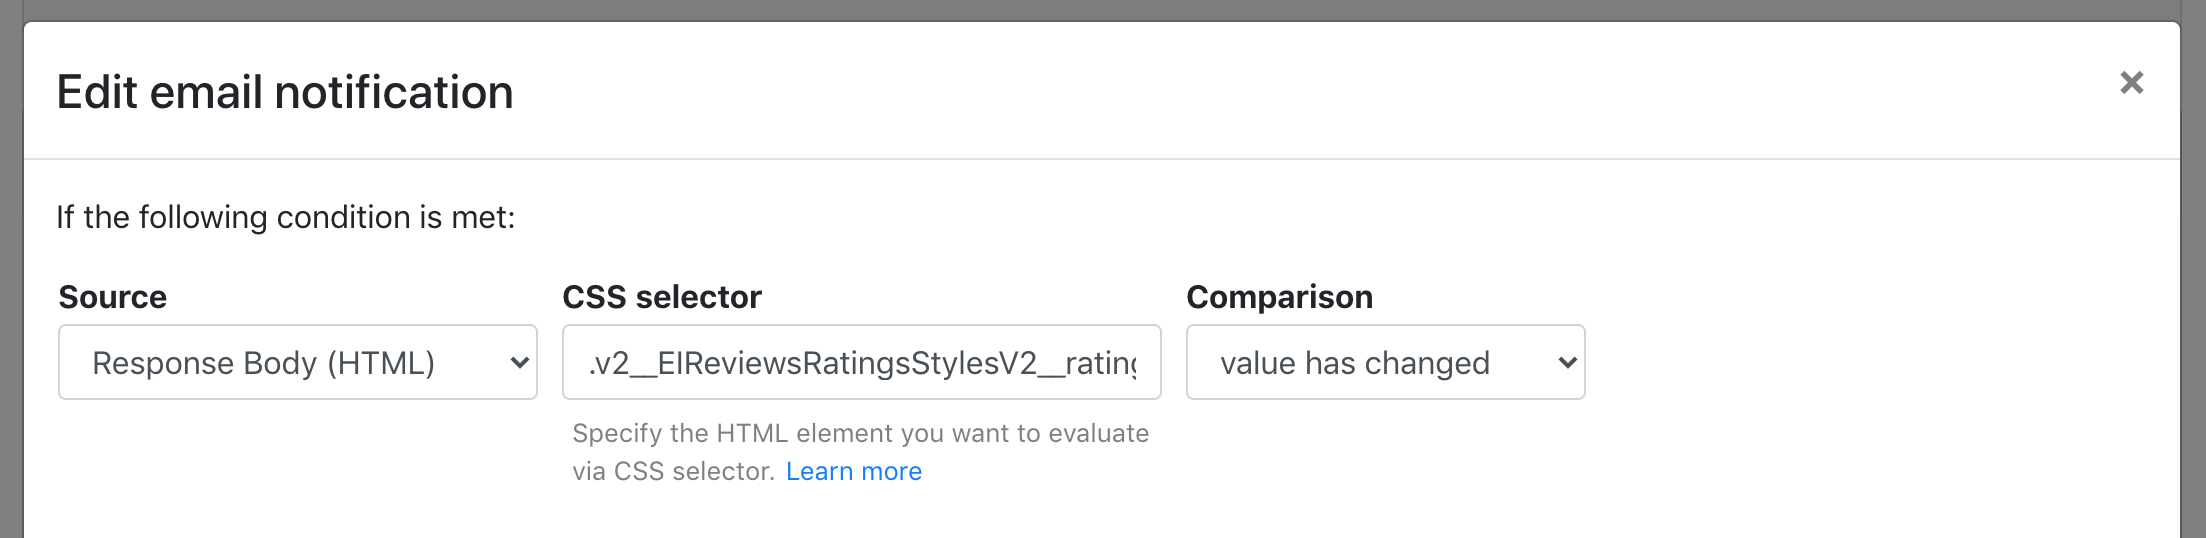 notification-property-css-selector-value-has-changed